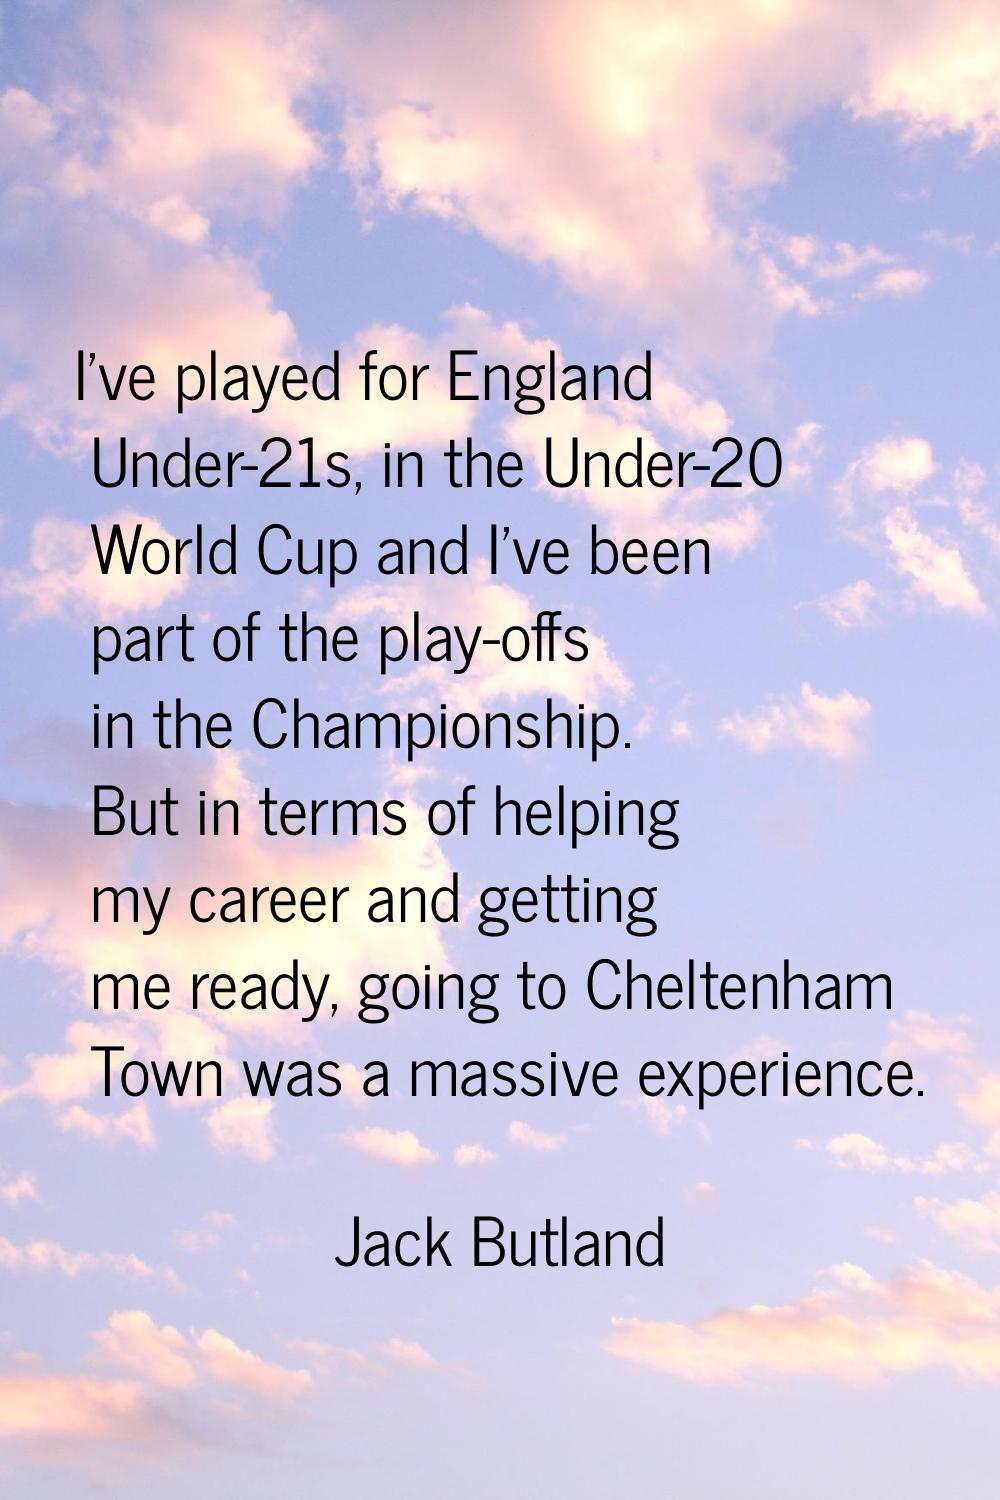 I've played for England Under-21s, in the Under-20 World Cup and I've been part of the play-offs in